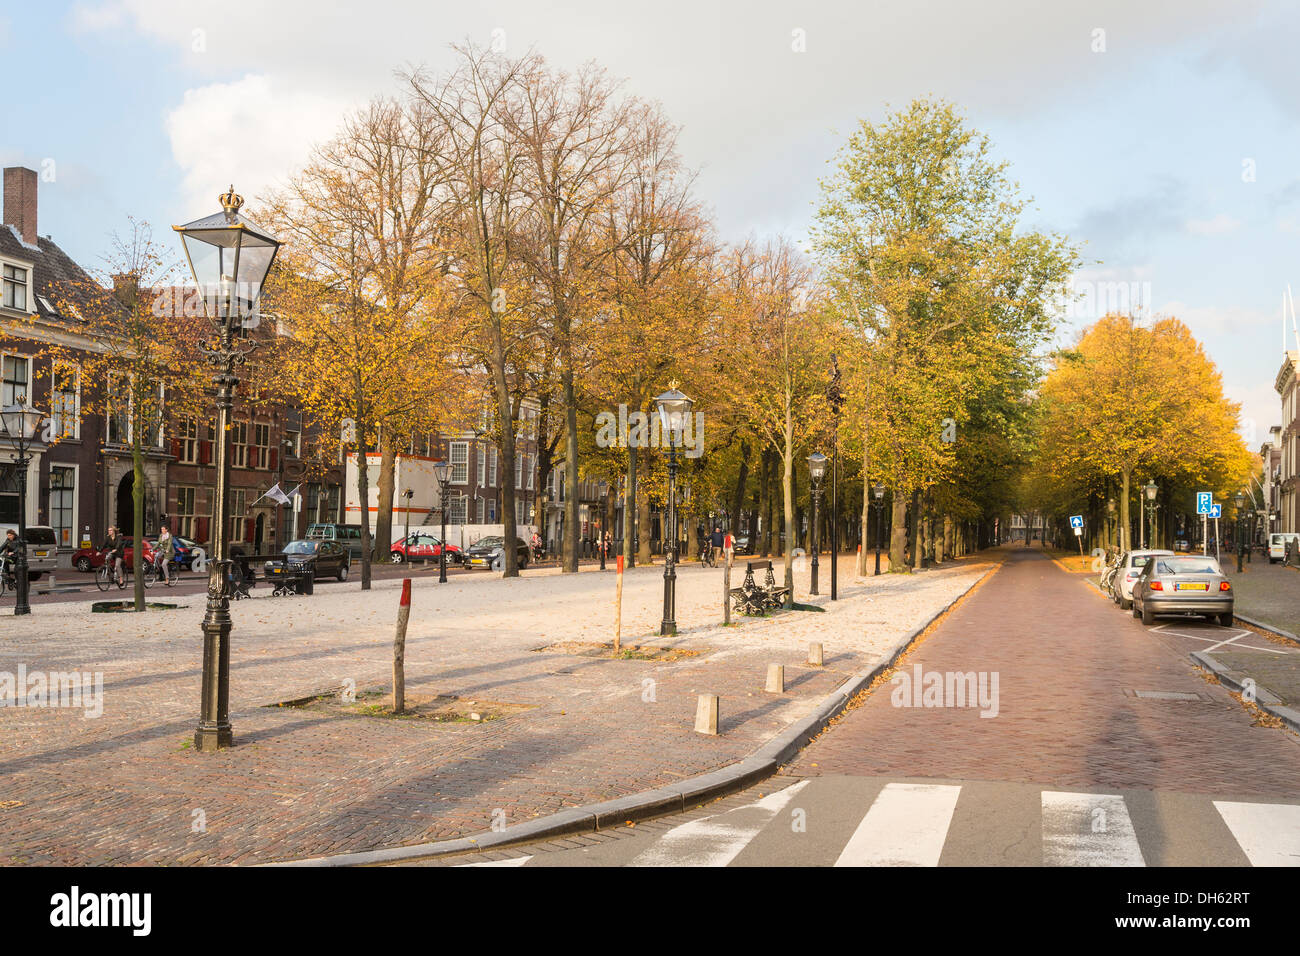 Lange Voorhout street scene in The Hague, Holland, with trees with golden autumn colours and traditional black lampposts Stock Photo